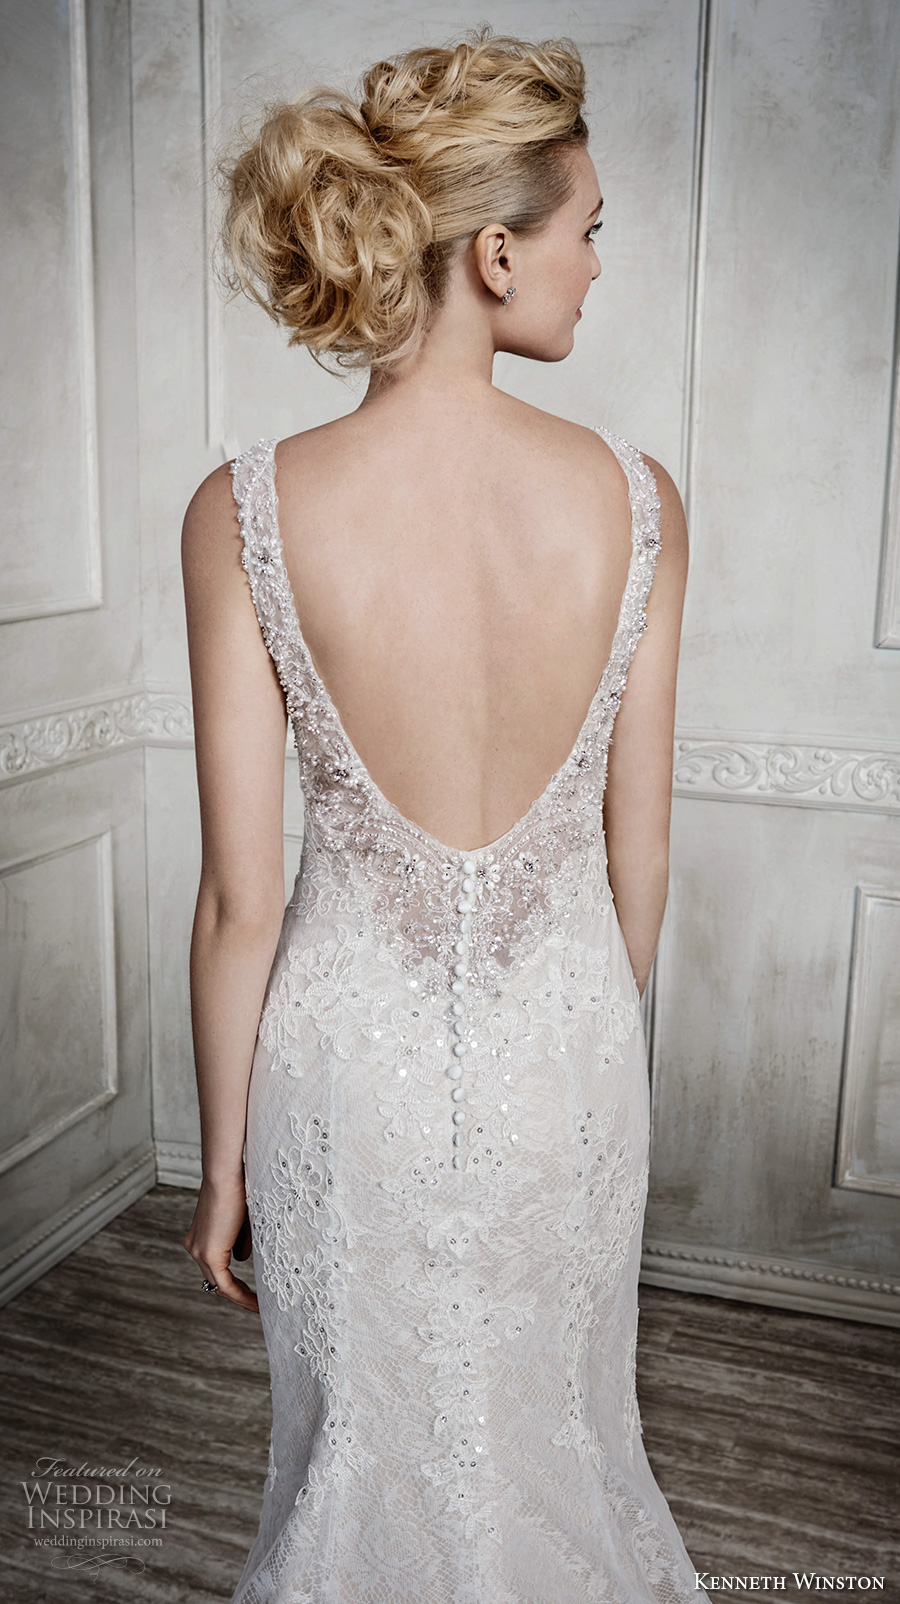 kenneth winston fall 2016 bridal sleeveless embroidered strap sweetheart neckline full embellishment beautiful elegant fit and flare wedding dress low back long train (1670) zbv